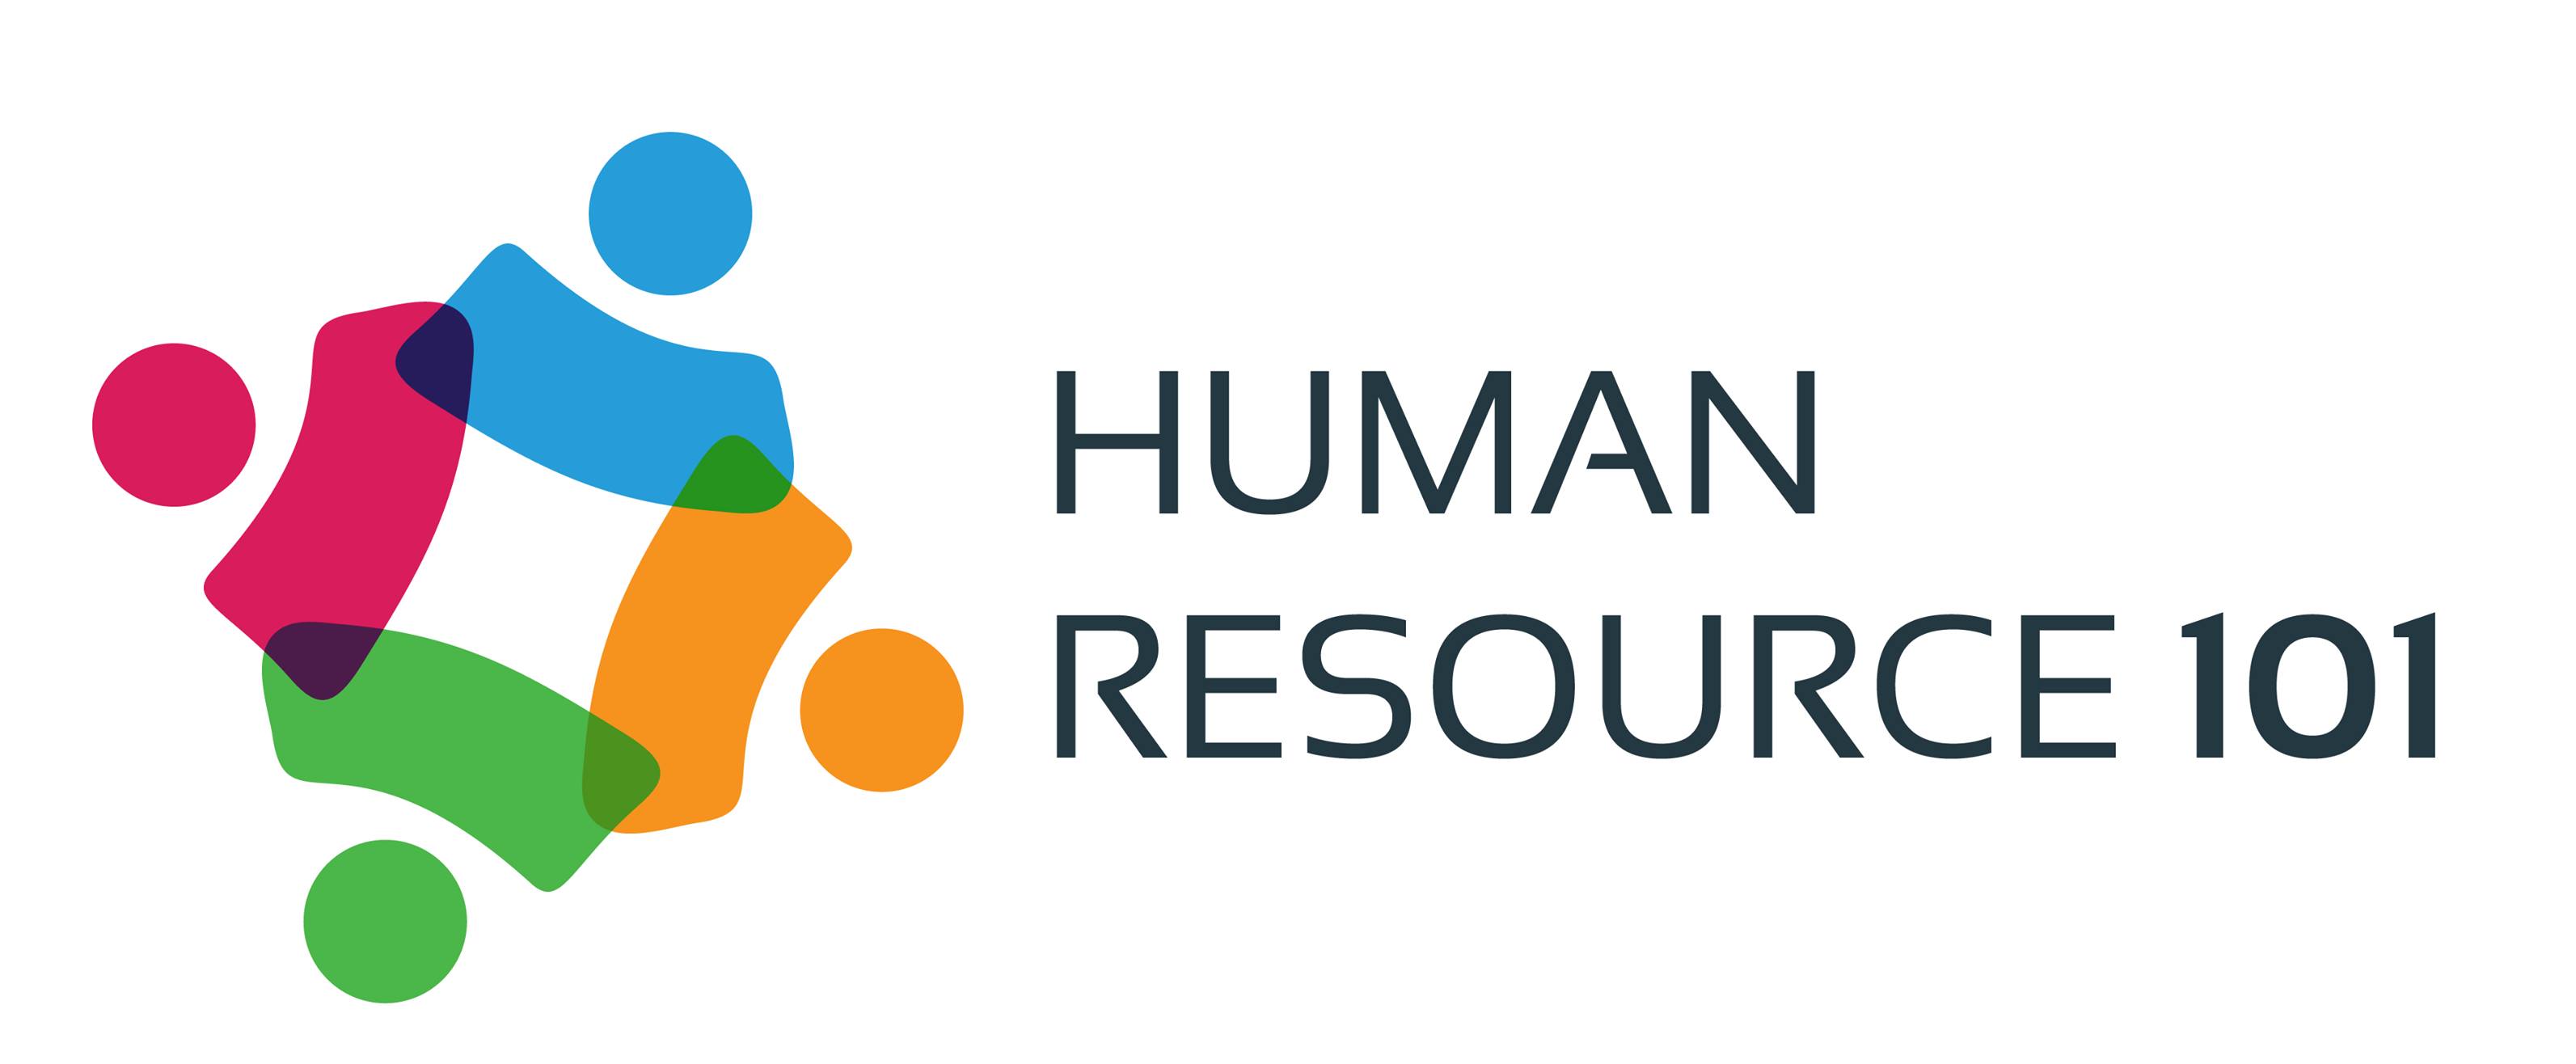 Human Resource 101 Consulting Limited